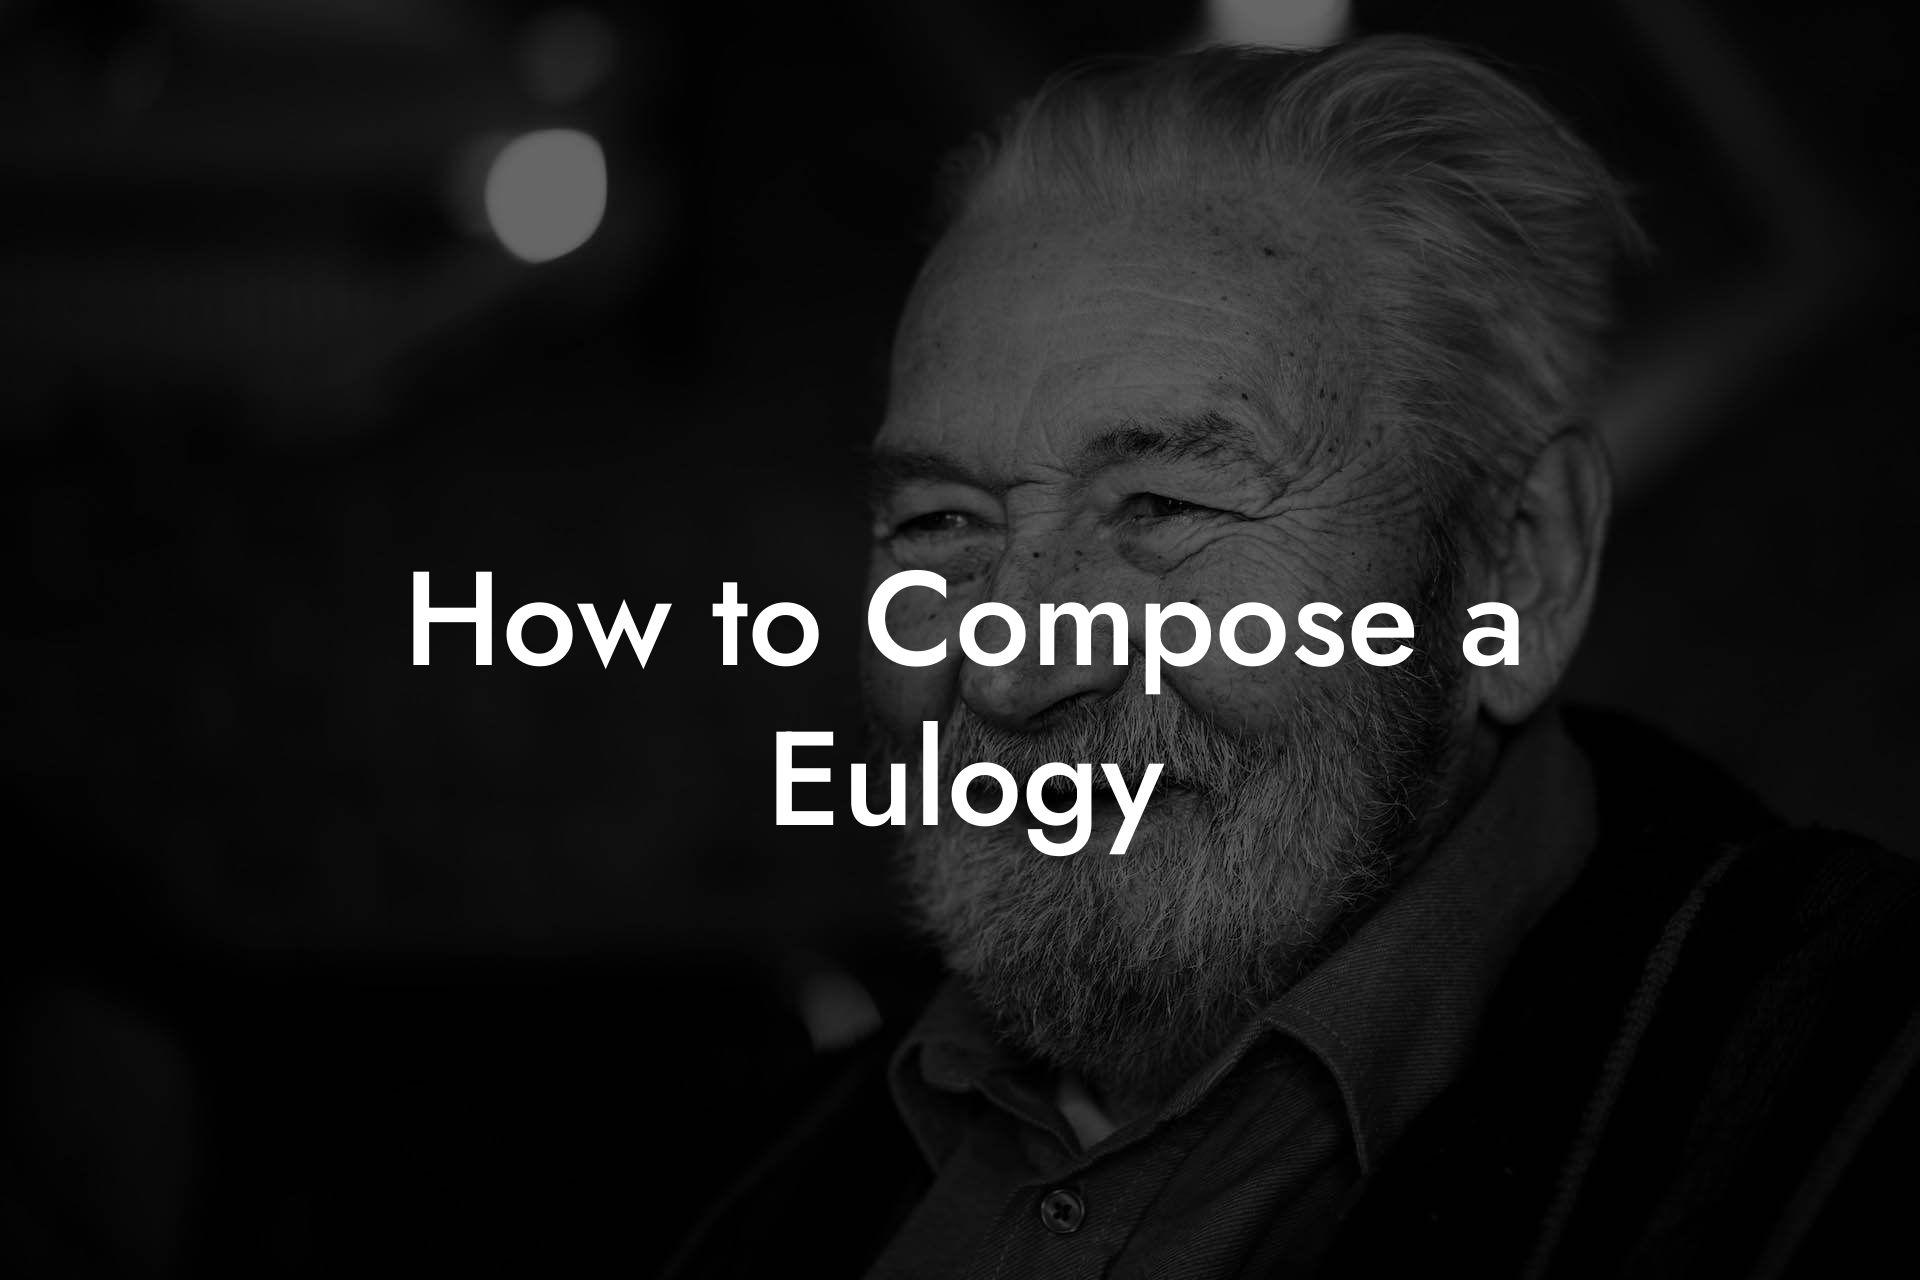 How to Compose a Eulogy